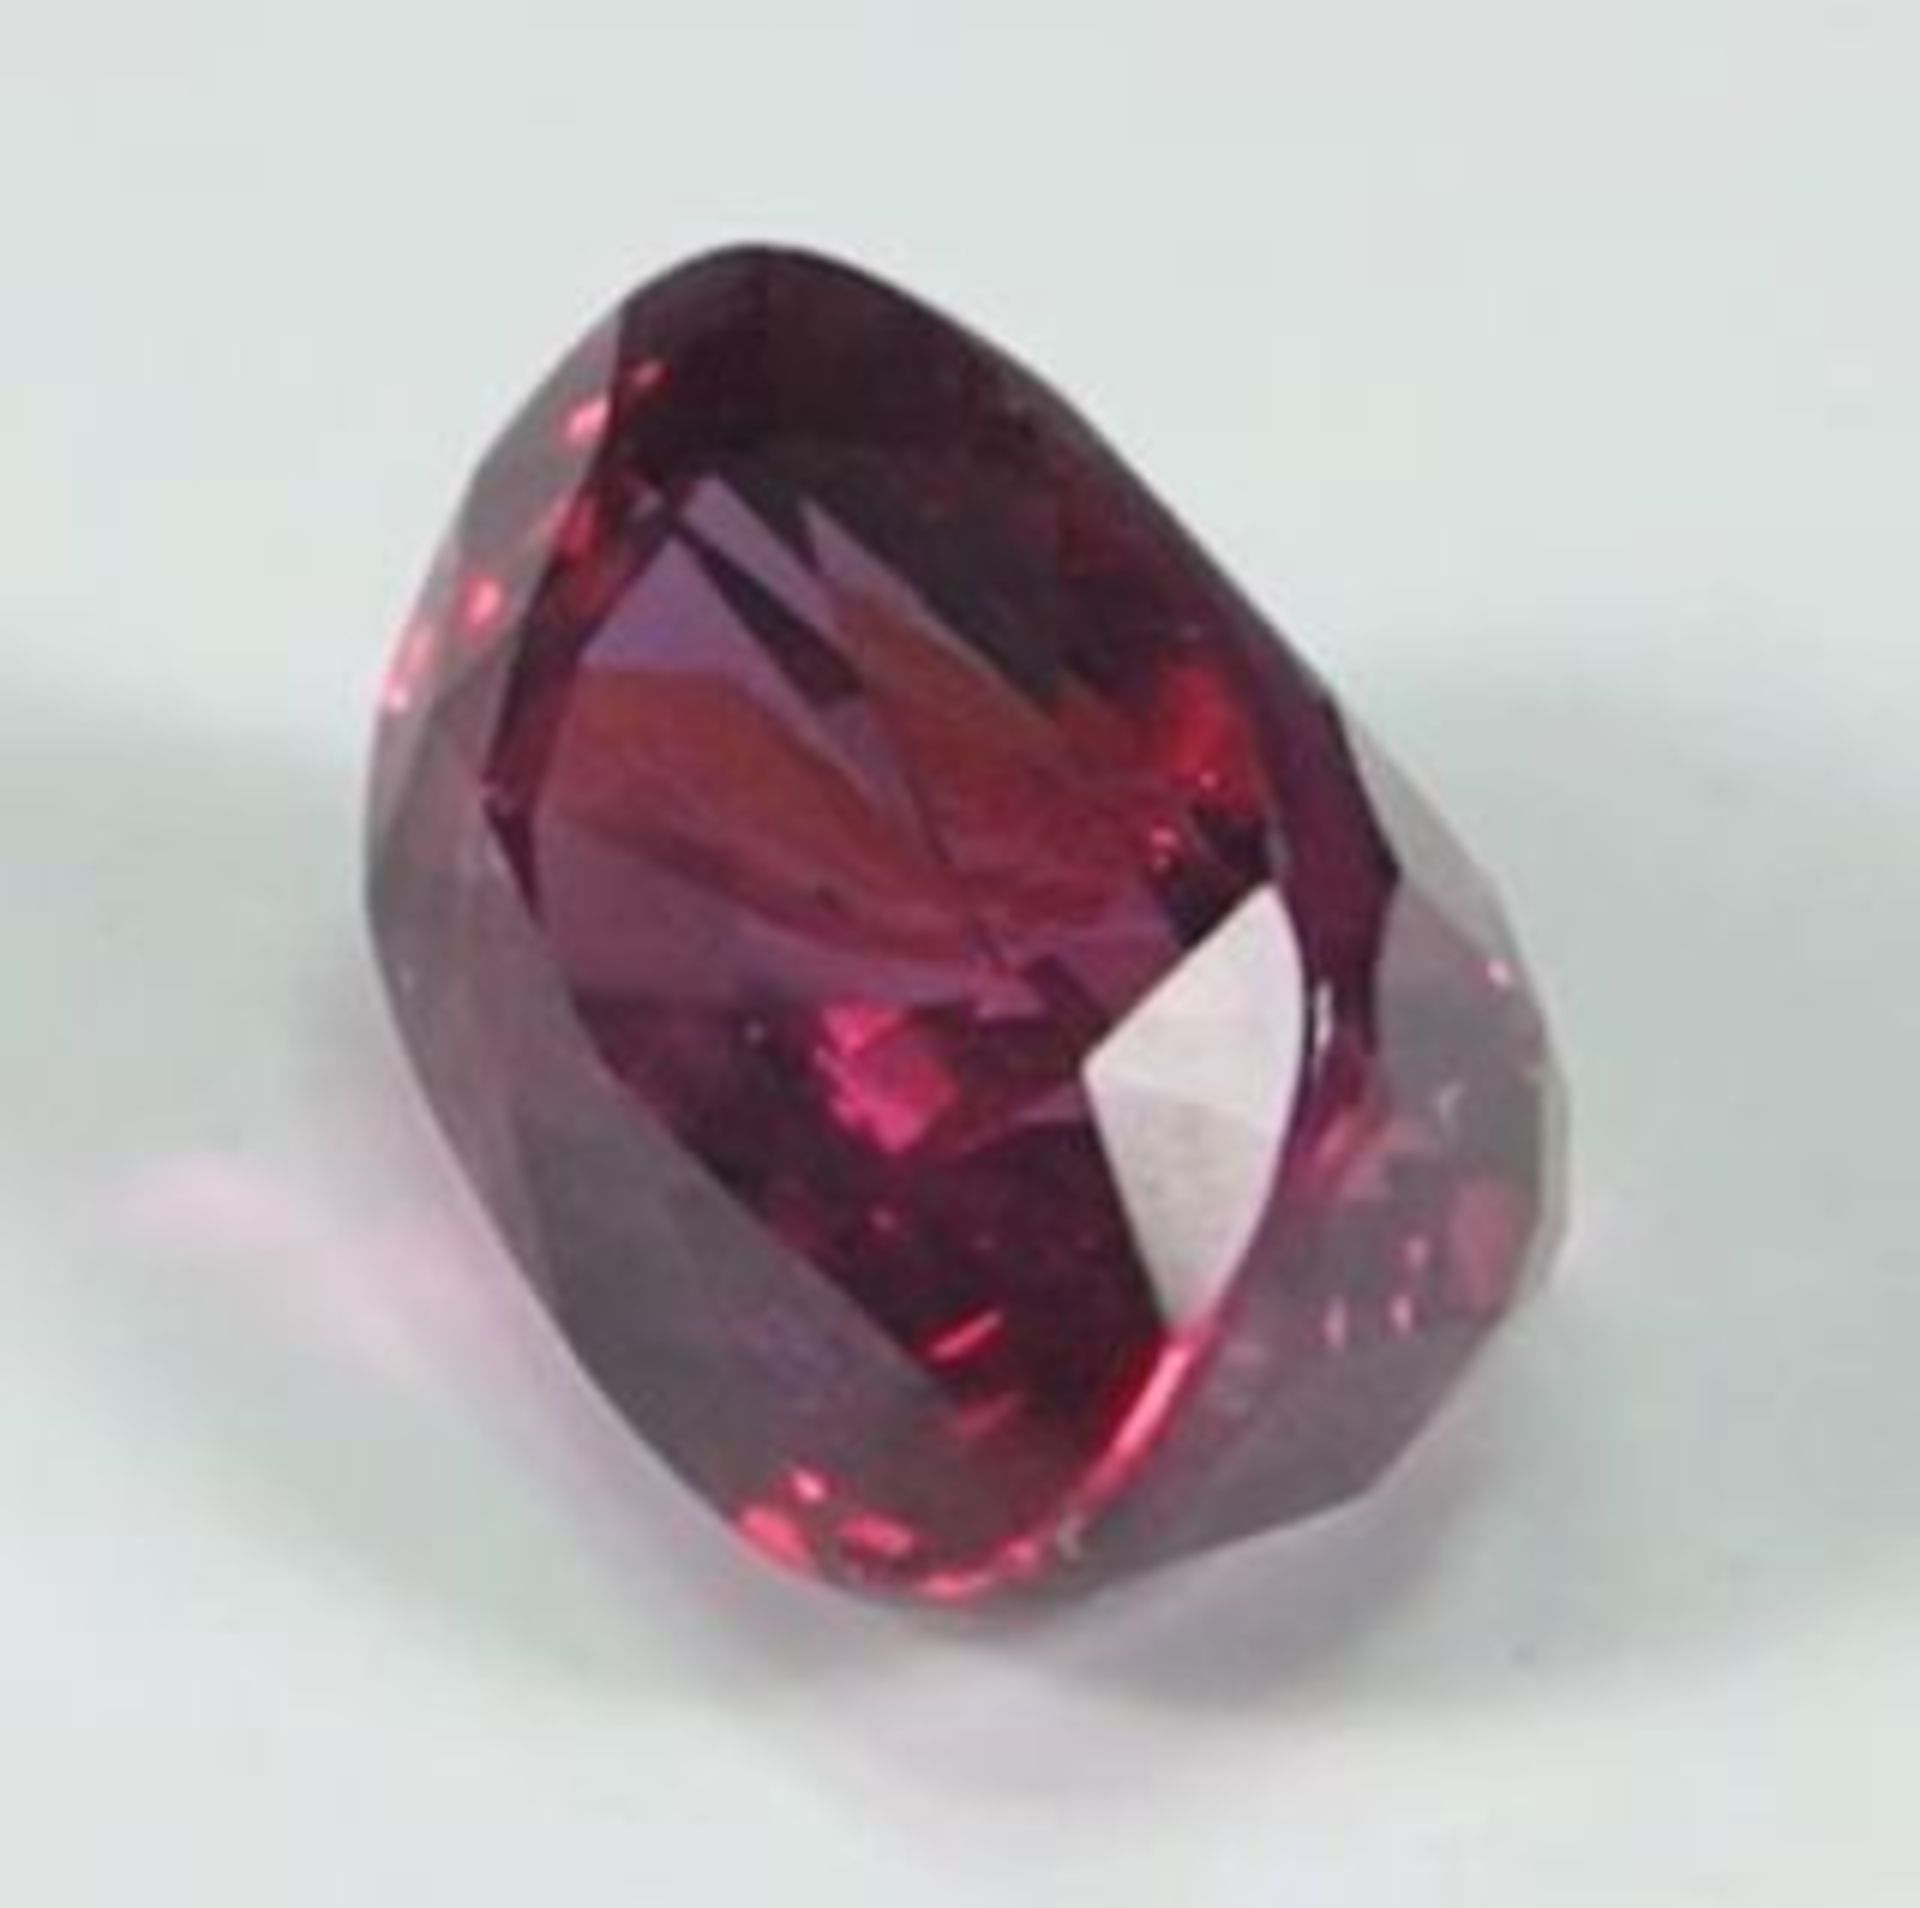 GIA certified 3.03 ct. Ruby Untreated - Image 6 of 10